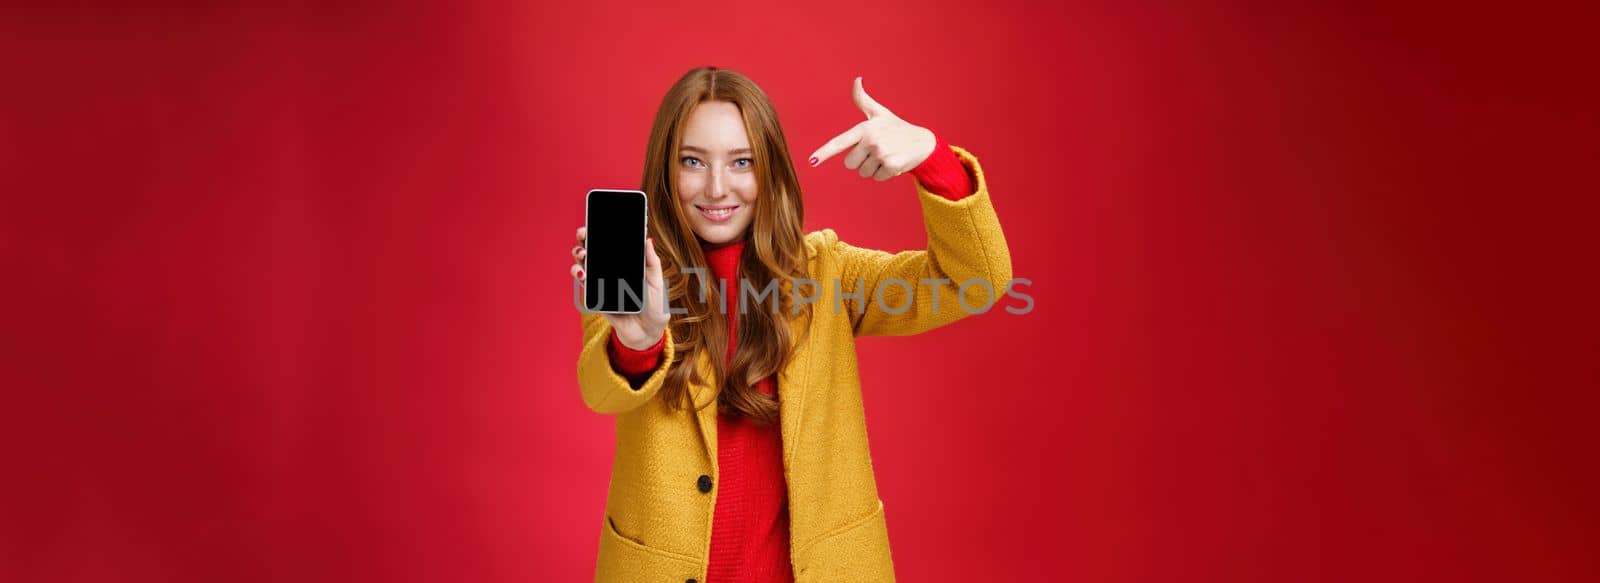 Pick this phone you never regret. Portrait of friendly-looking attractive and confident redhead glamour girlfriend in yellow coat showing smartphone pointing at mobile as smiling broadly at camera.